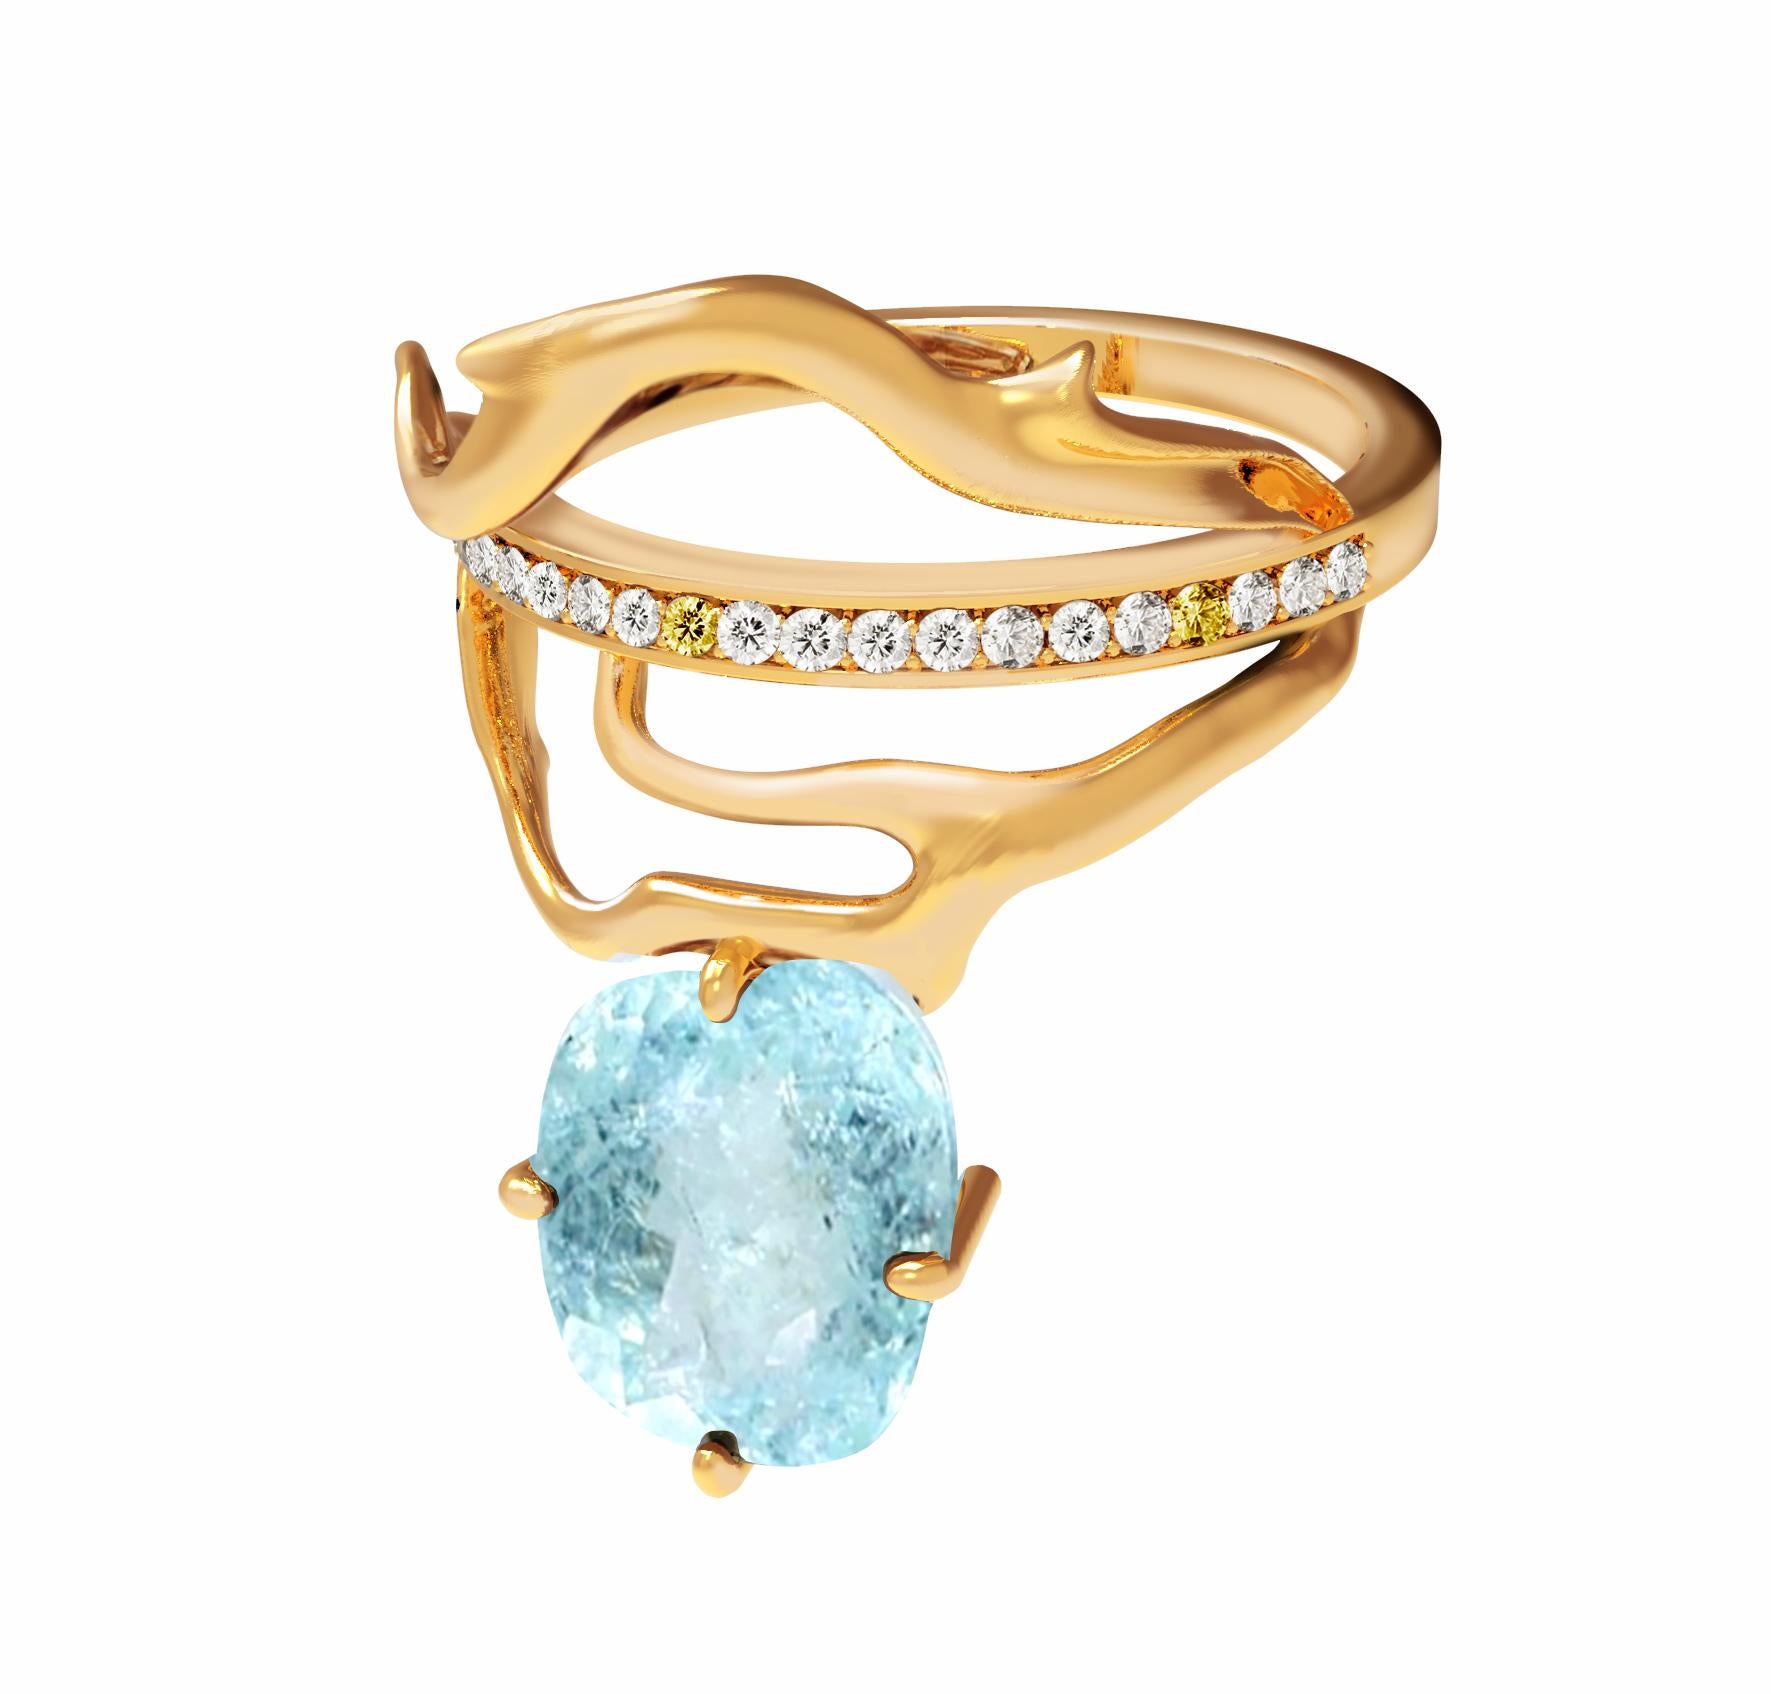 This Tibetan 18 karat yellow gold contemporary ring is encrusted with diamonds, yellow sapphires, and oval cut paraiba tourmaline  (neon copper bearing, 2,4 carats, blue with inclusions). Size is custom made. Can be made with different gems.
It was